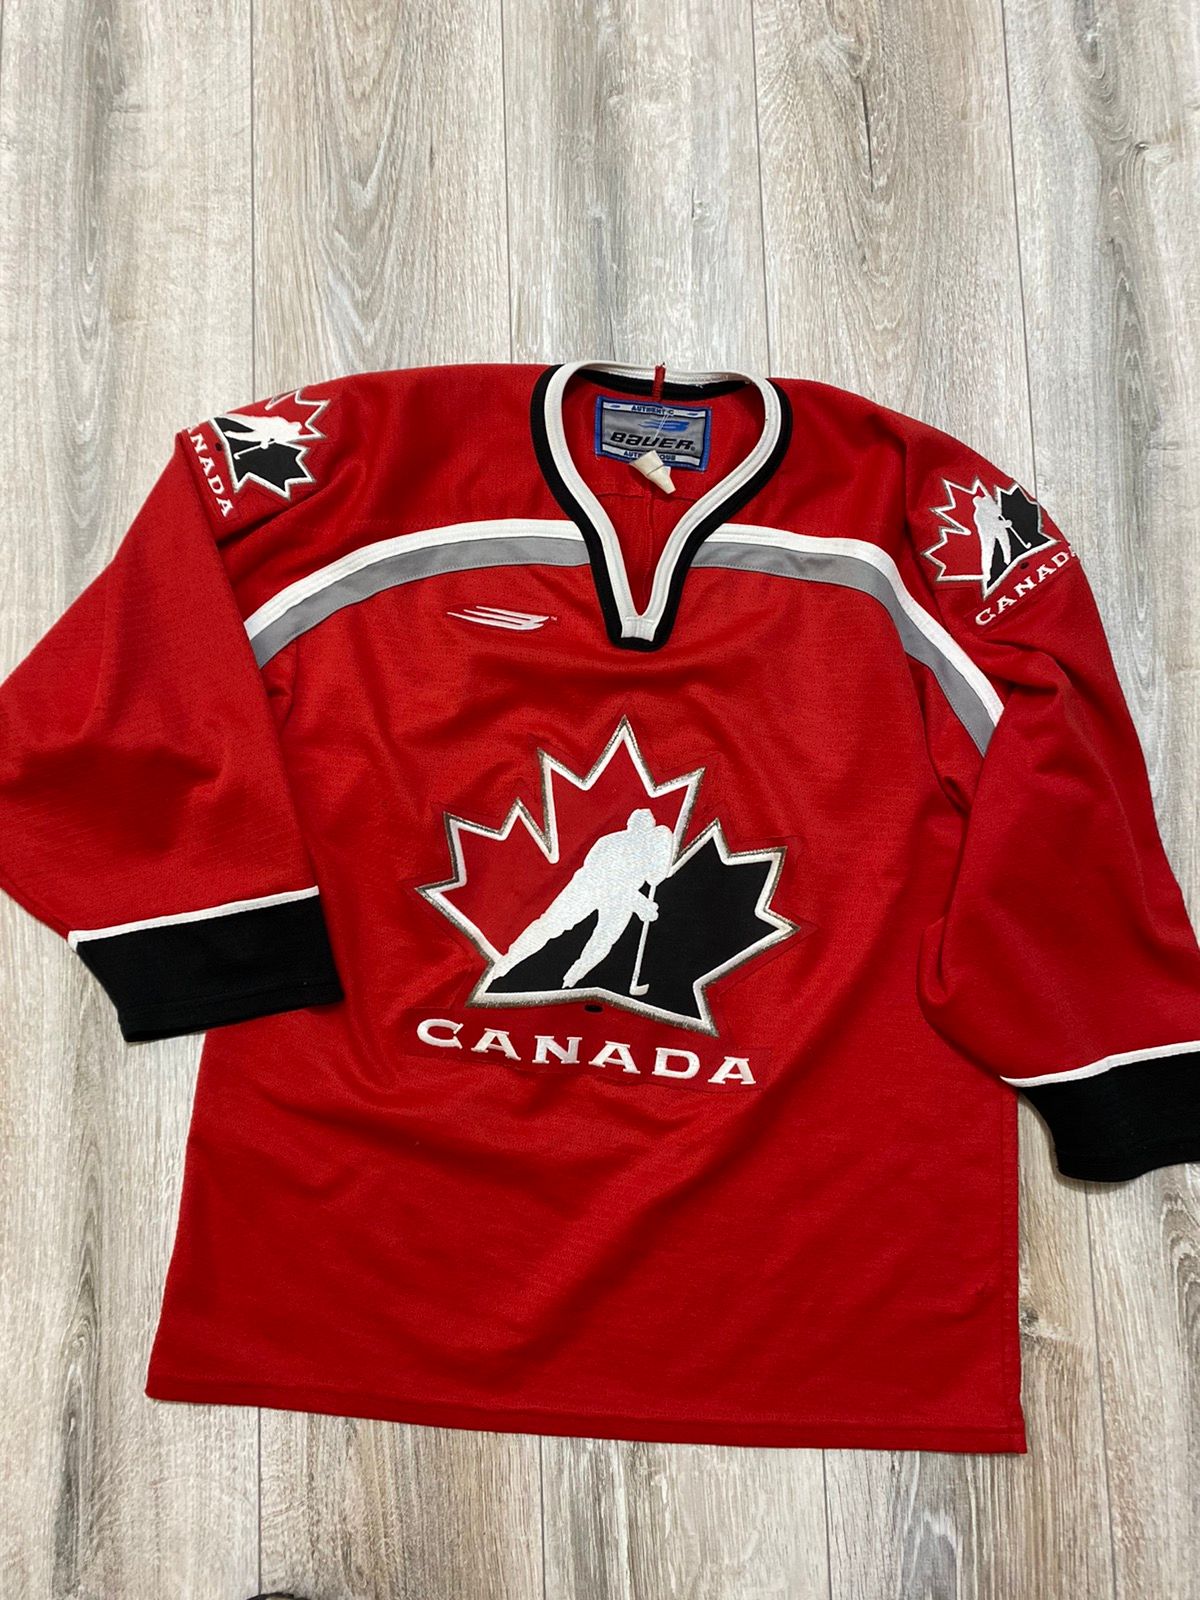 1998 OLYMPICS AUTHENTIC BAUER TEAM CANADA HOCKEY JERSEY SIZE 48